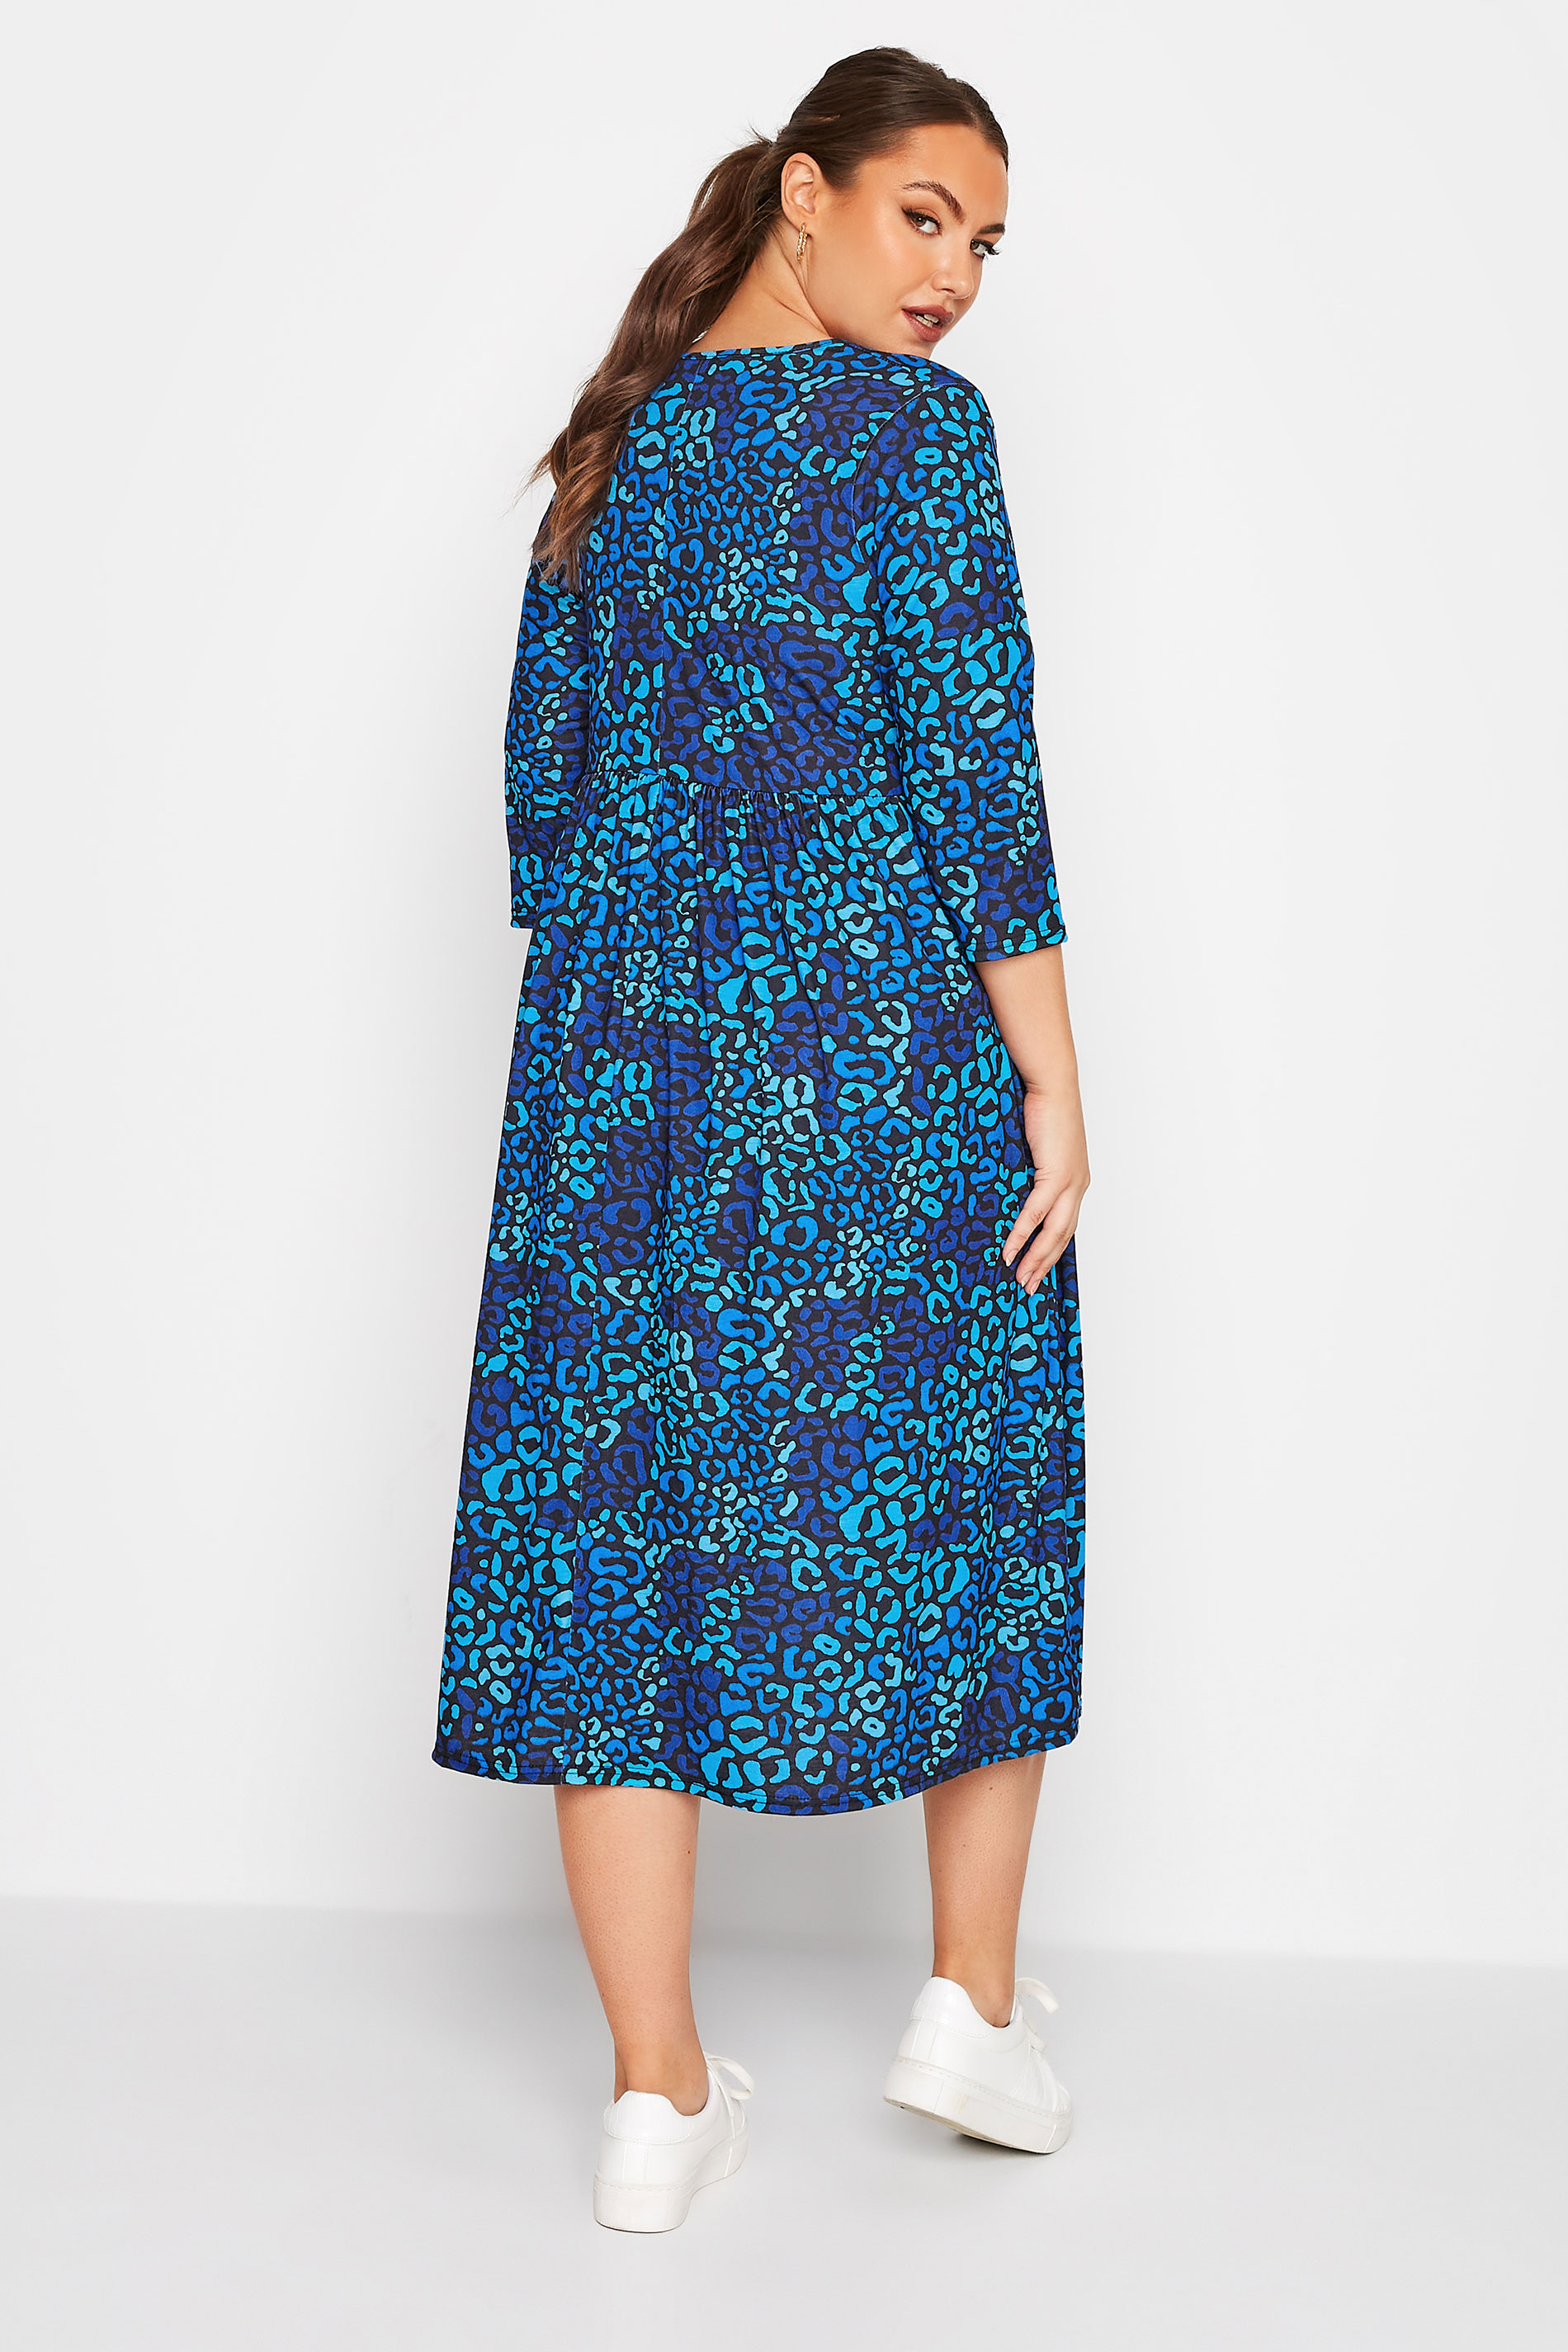 LIMITED COLLECTION Plus Size Blue Leopard Print Dress | Yours Clothing  3